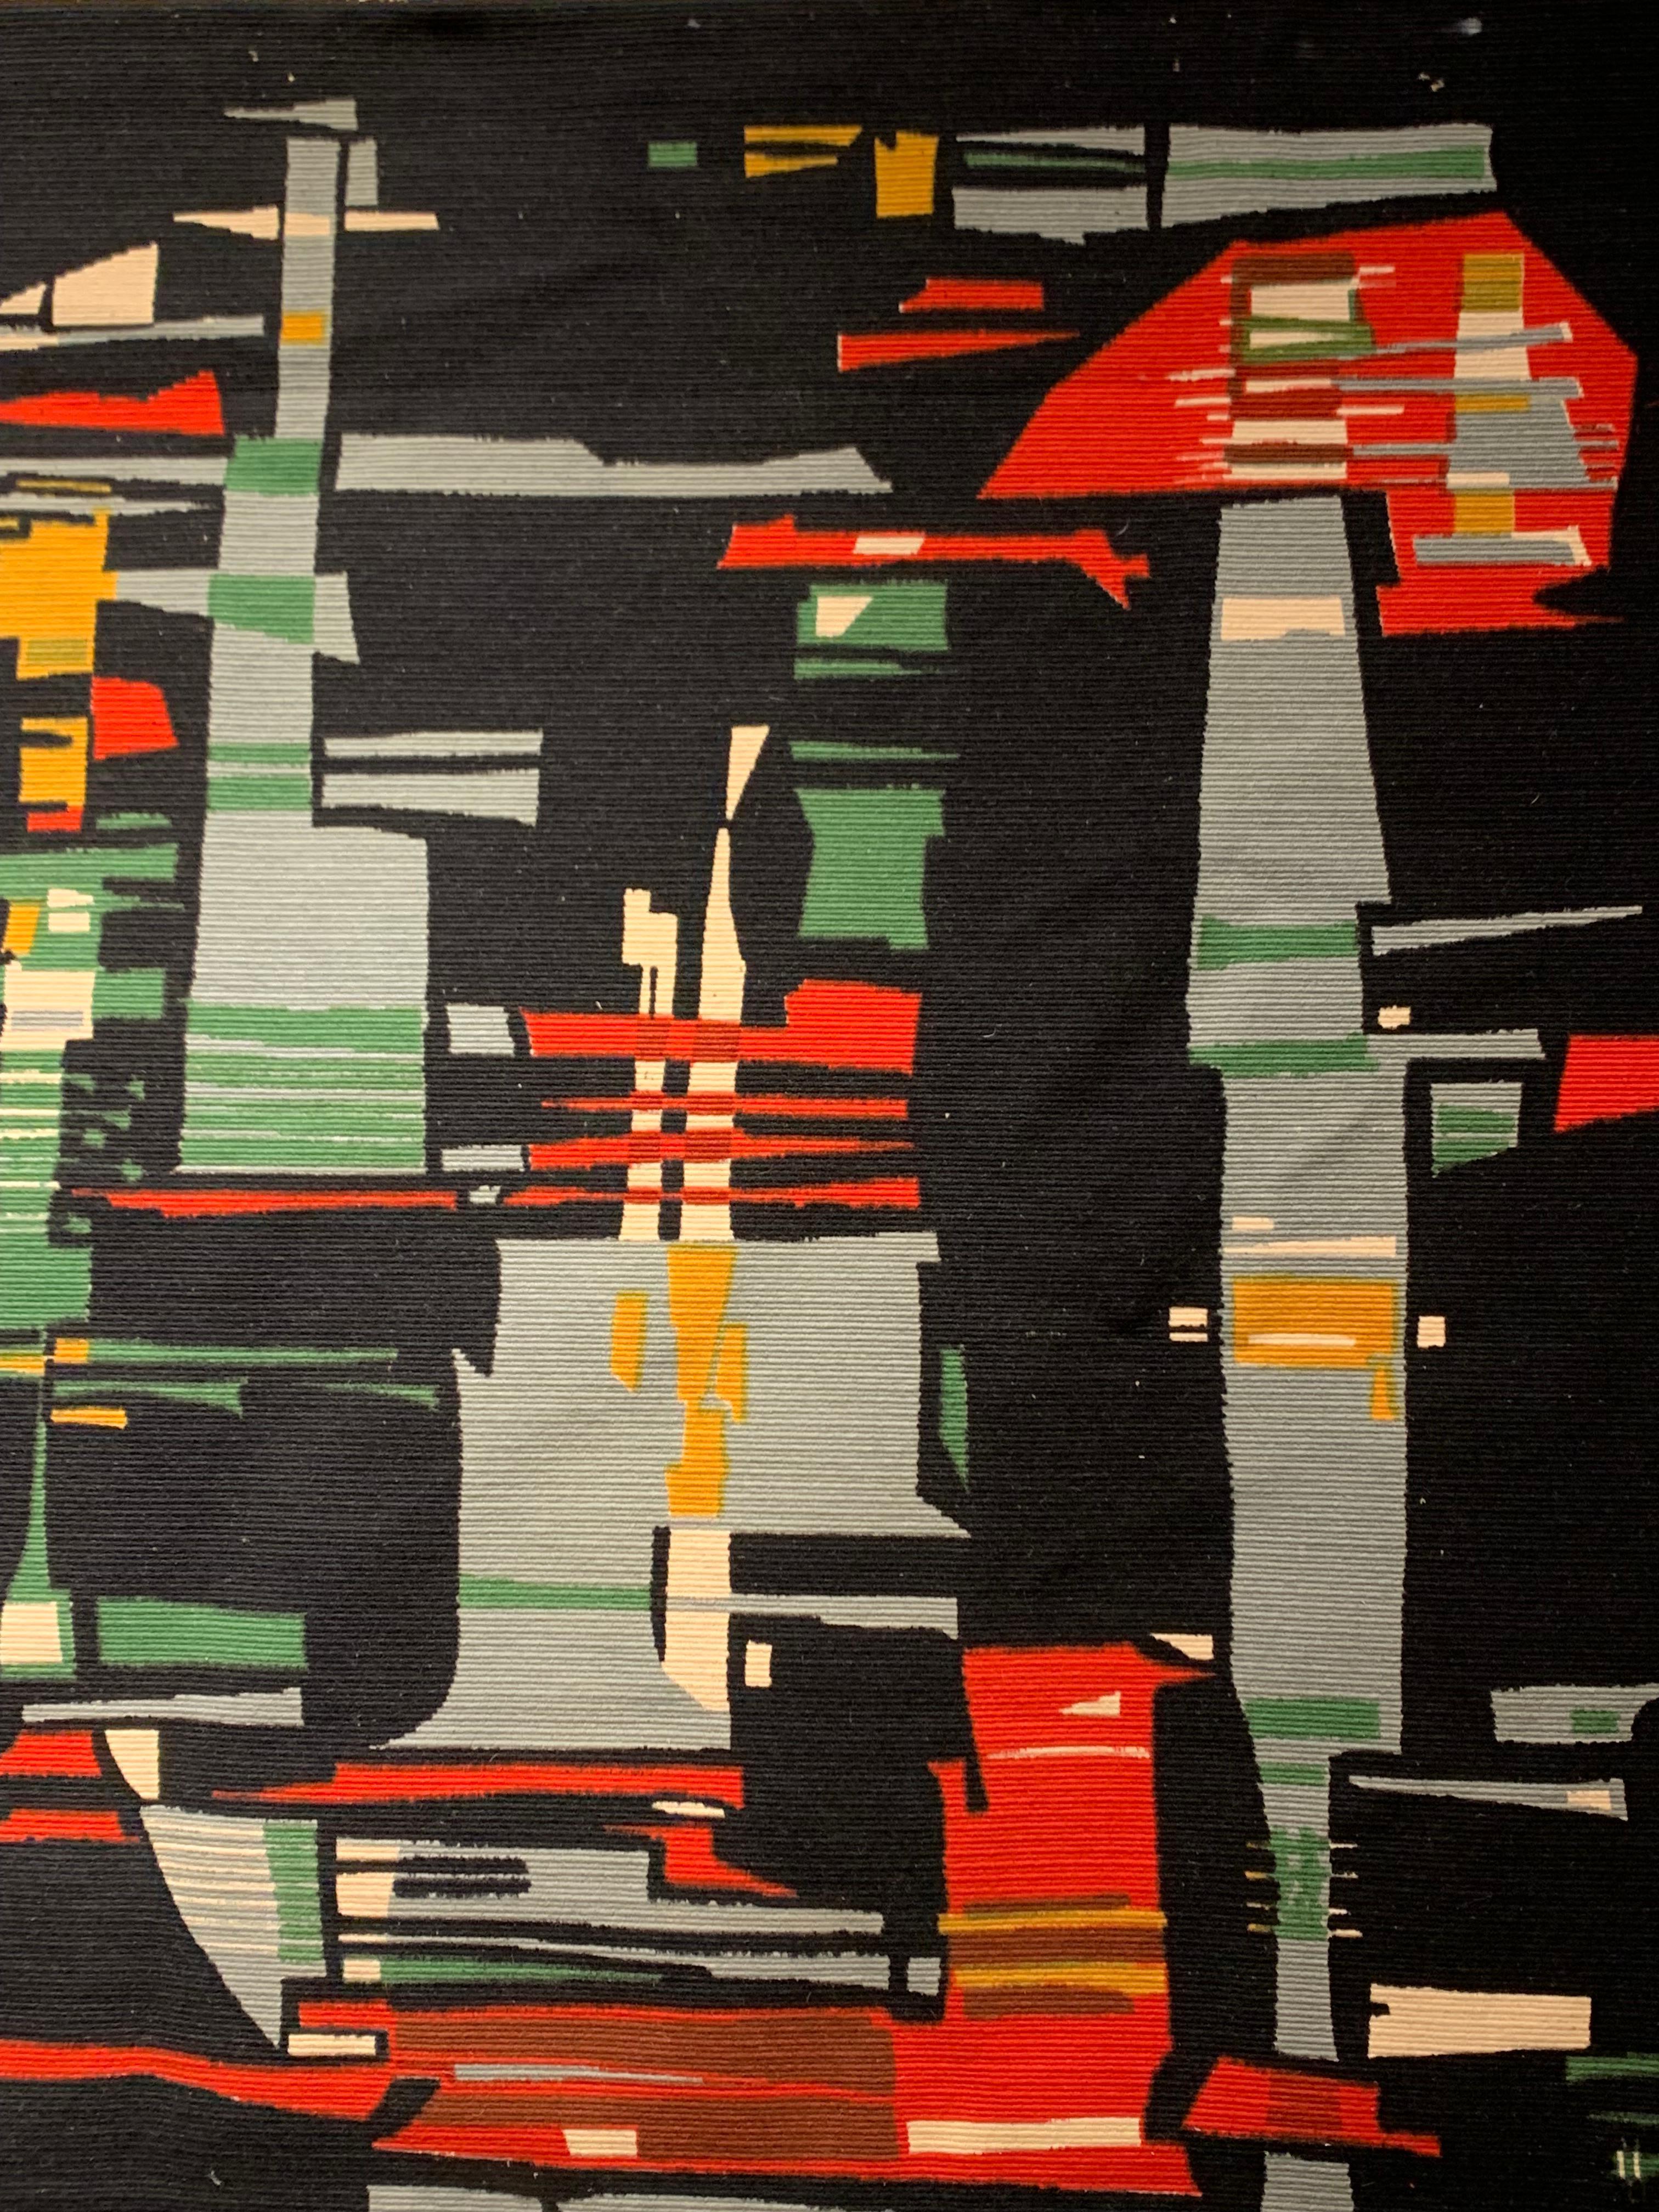 Abstract wool printed tapestry of Mid-century (20th) modern abstract french origin, signed at the bottom by Christian Royer.
It has a black background and holds a stunning work with the use of geometrical shapes representing design elements in